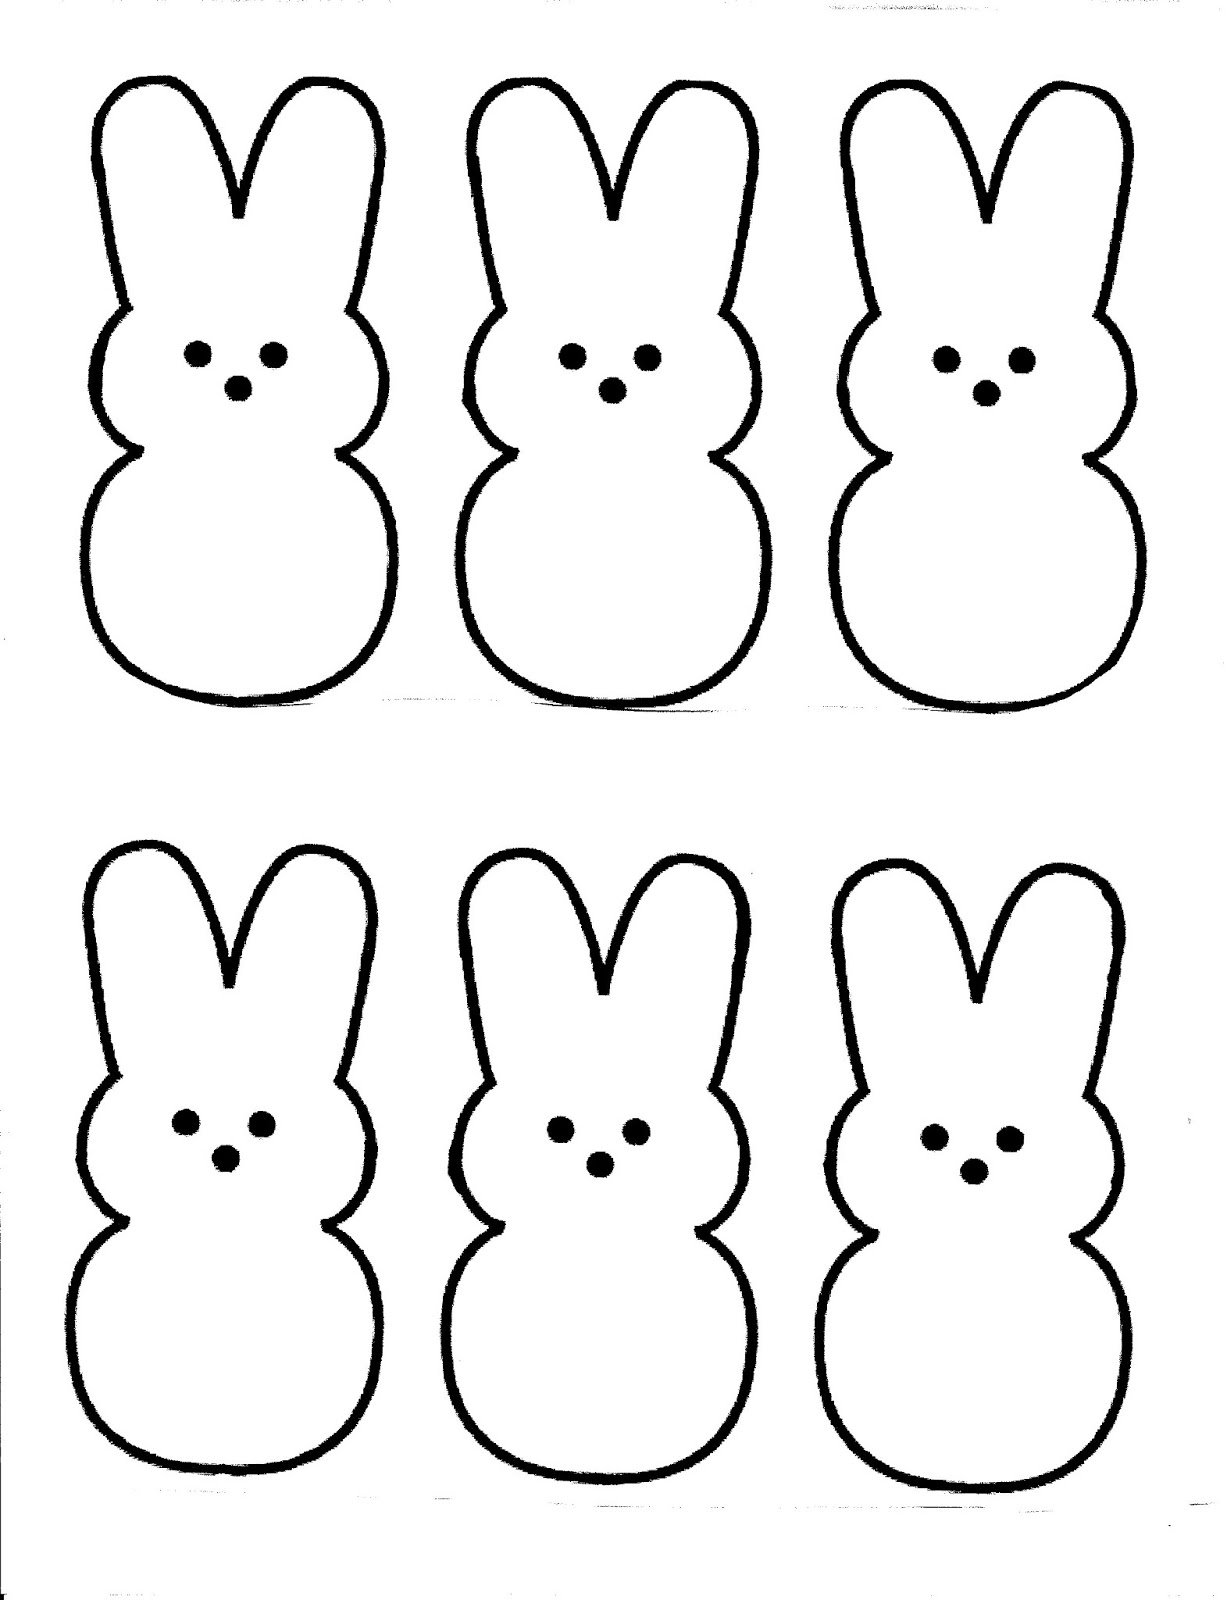 Peeps bunny coloring pages